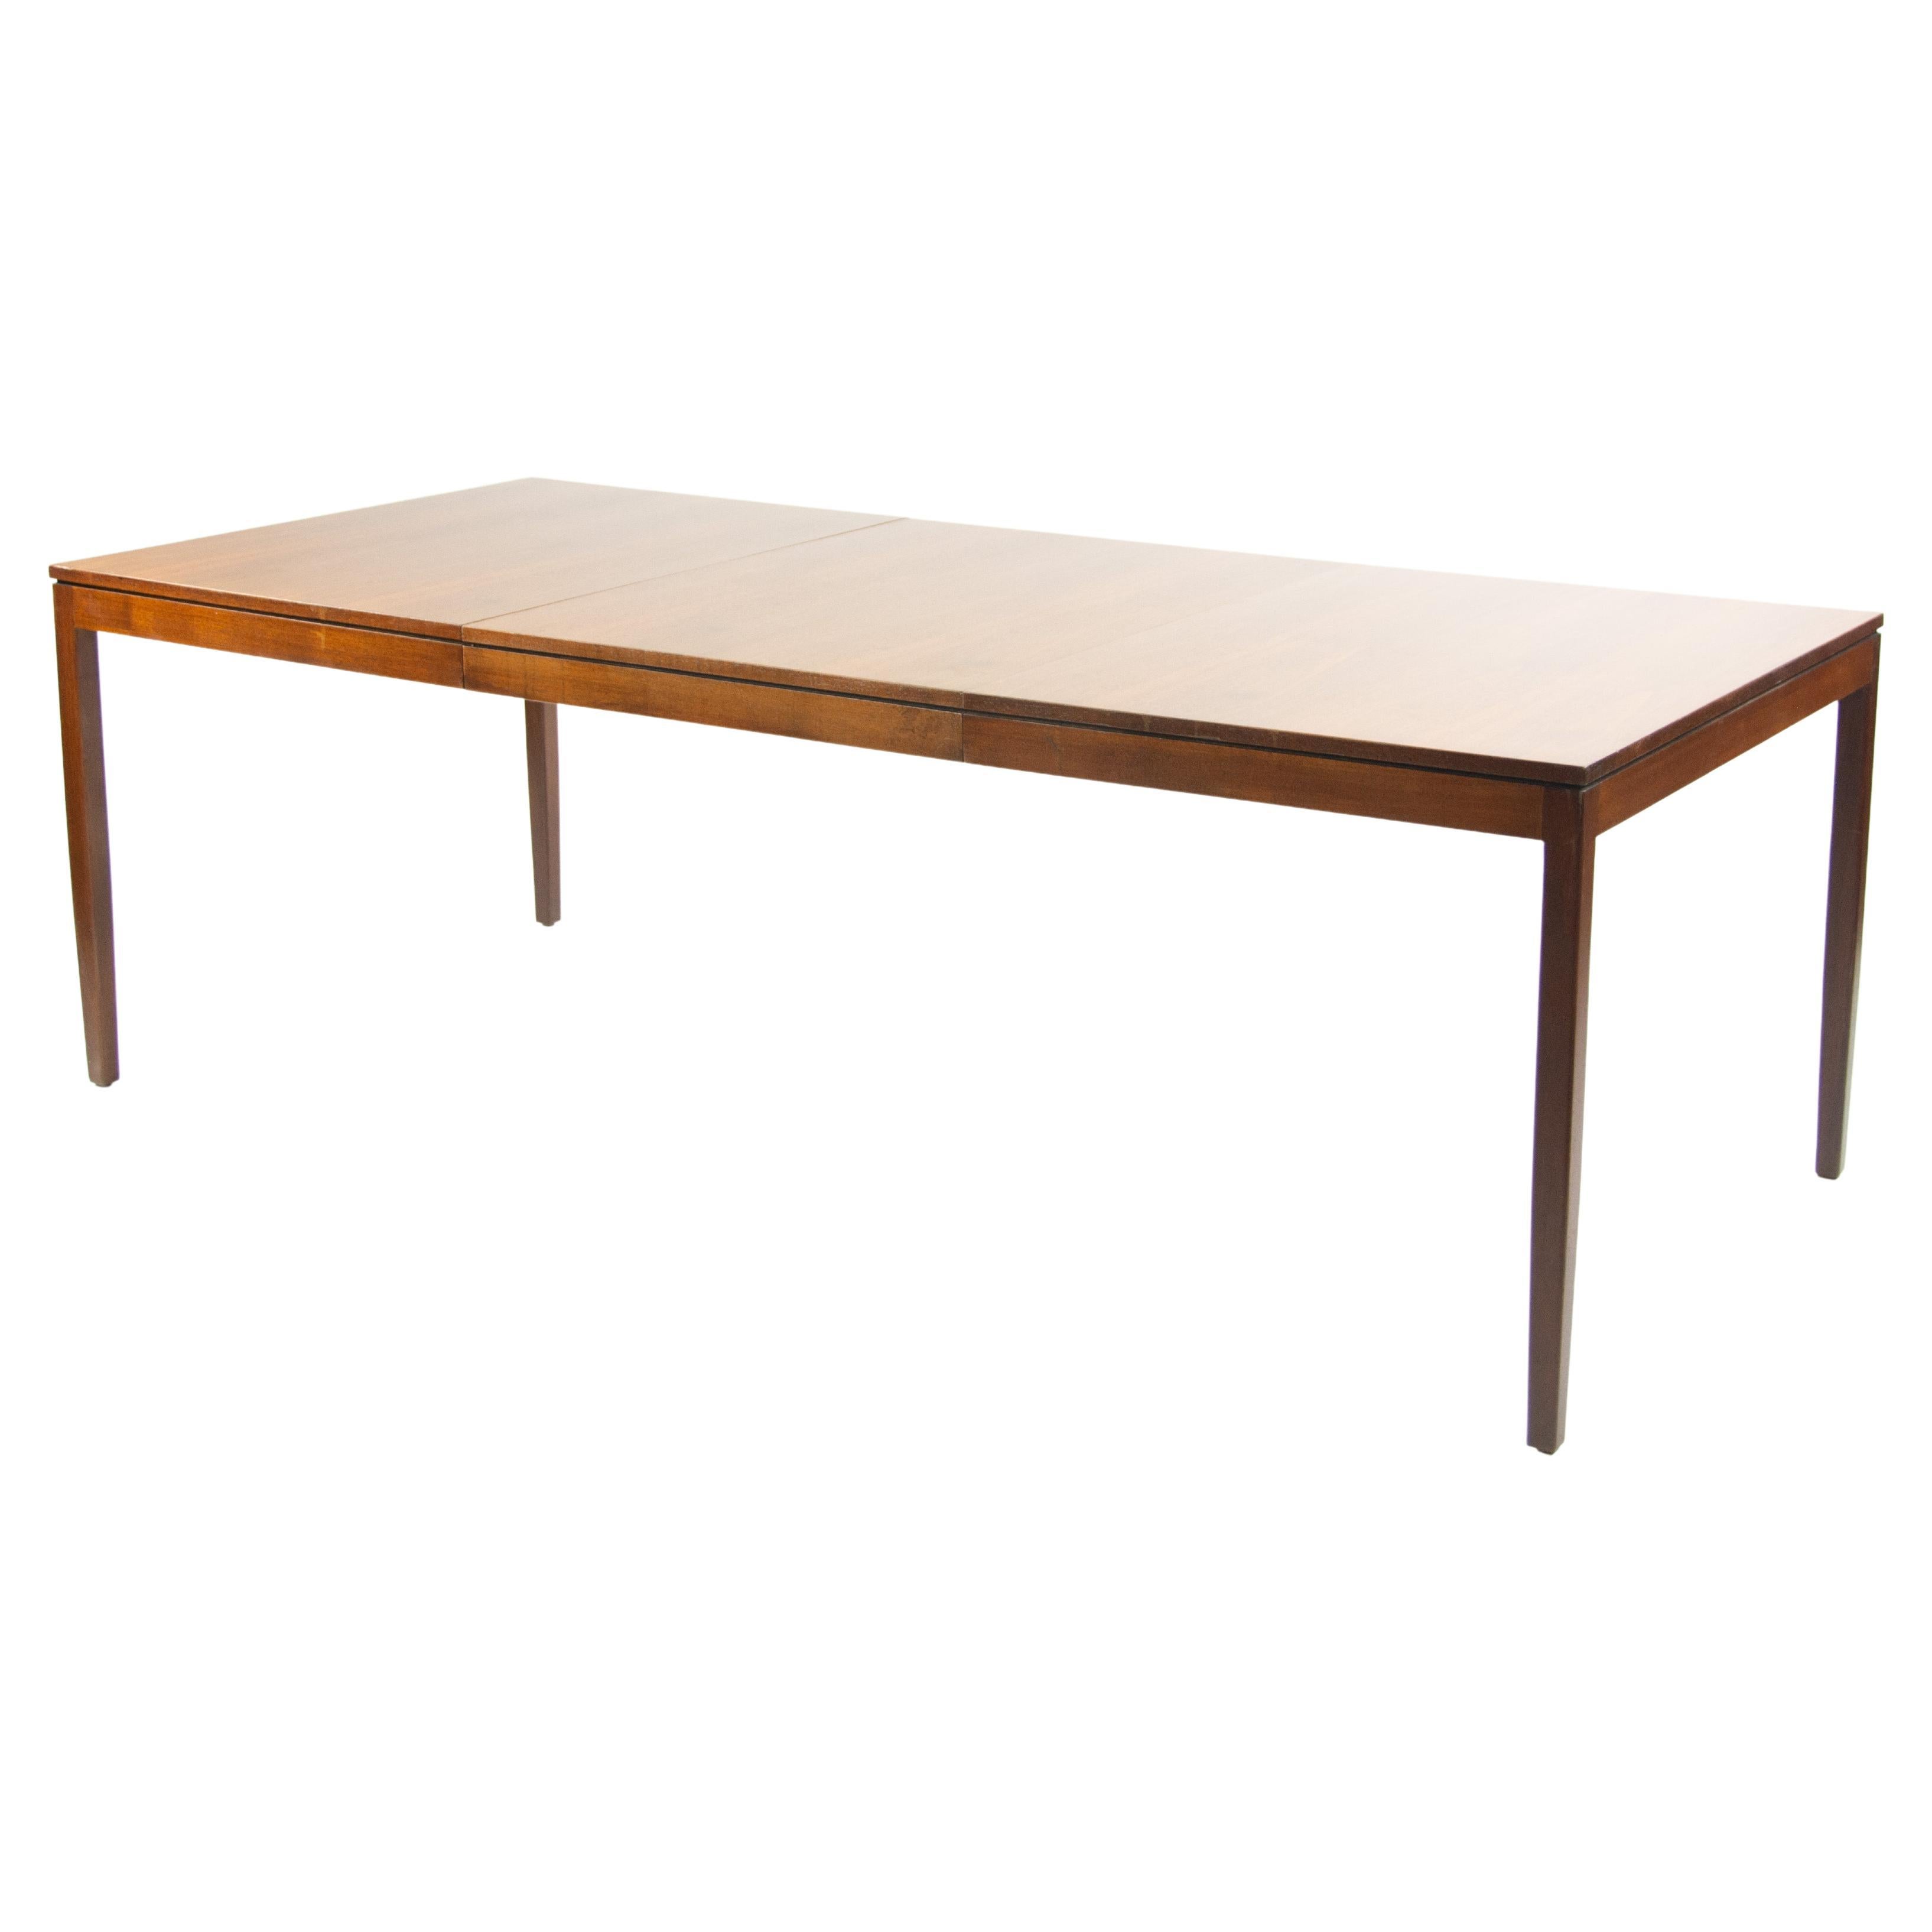 1950's Rare Original Florence Knoll Walnut Dining Table w/ Leaf 56-84 inches For Sale